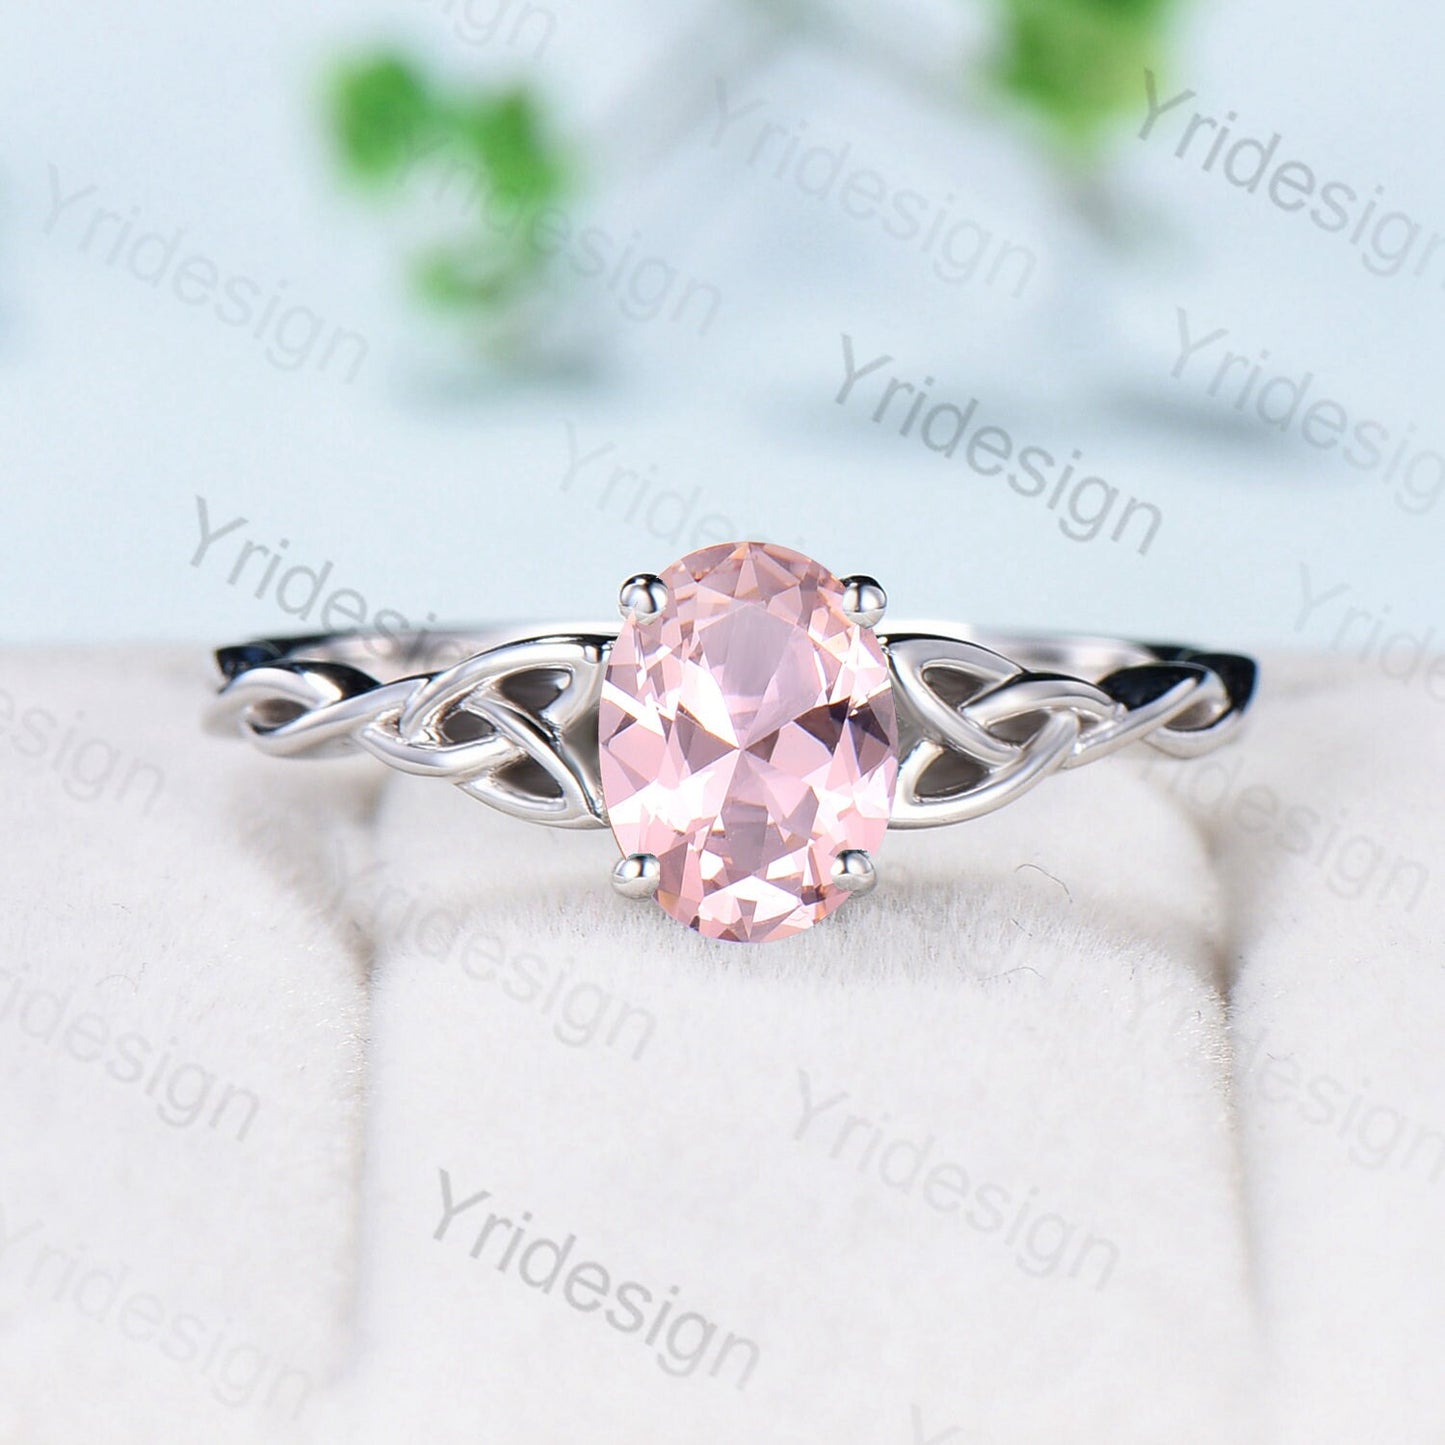 Norse Viking Morganite Ring Rose Gold Celtic Love Knot Oval Morganite Engagement Ring Vintage Unique Twisted Pink Crystal Wedding Ring Women - PENFINE